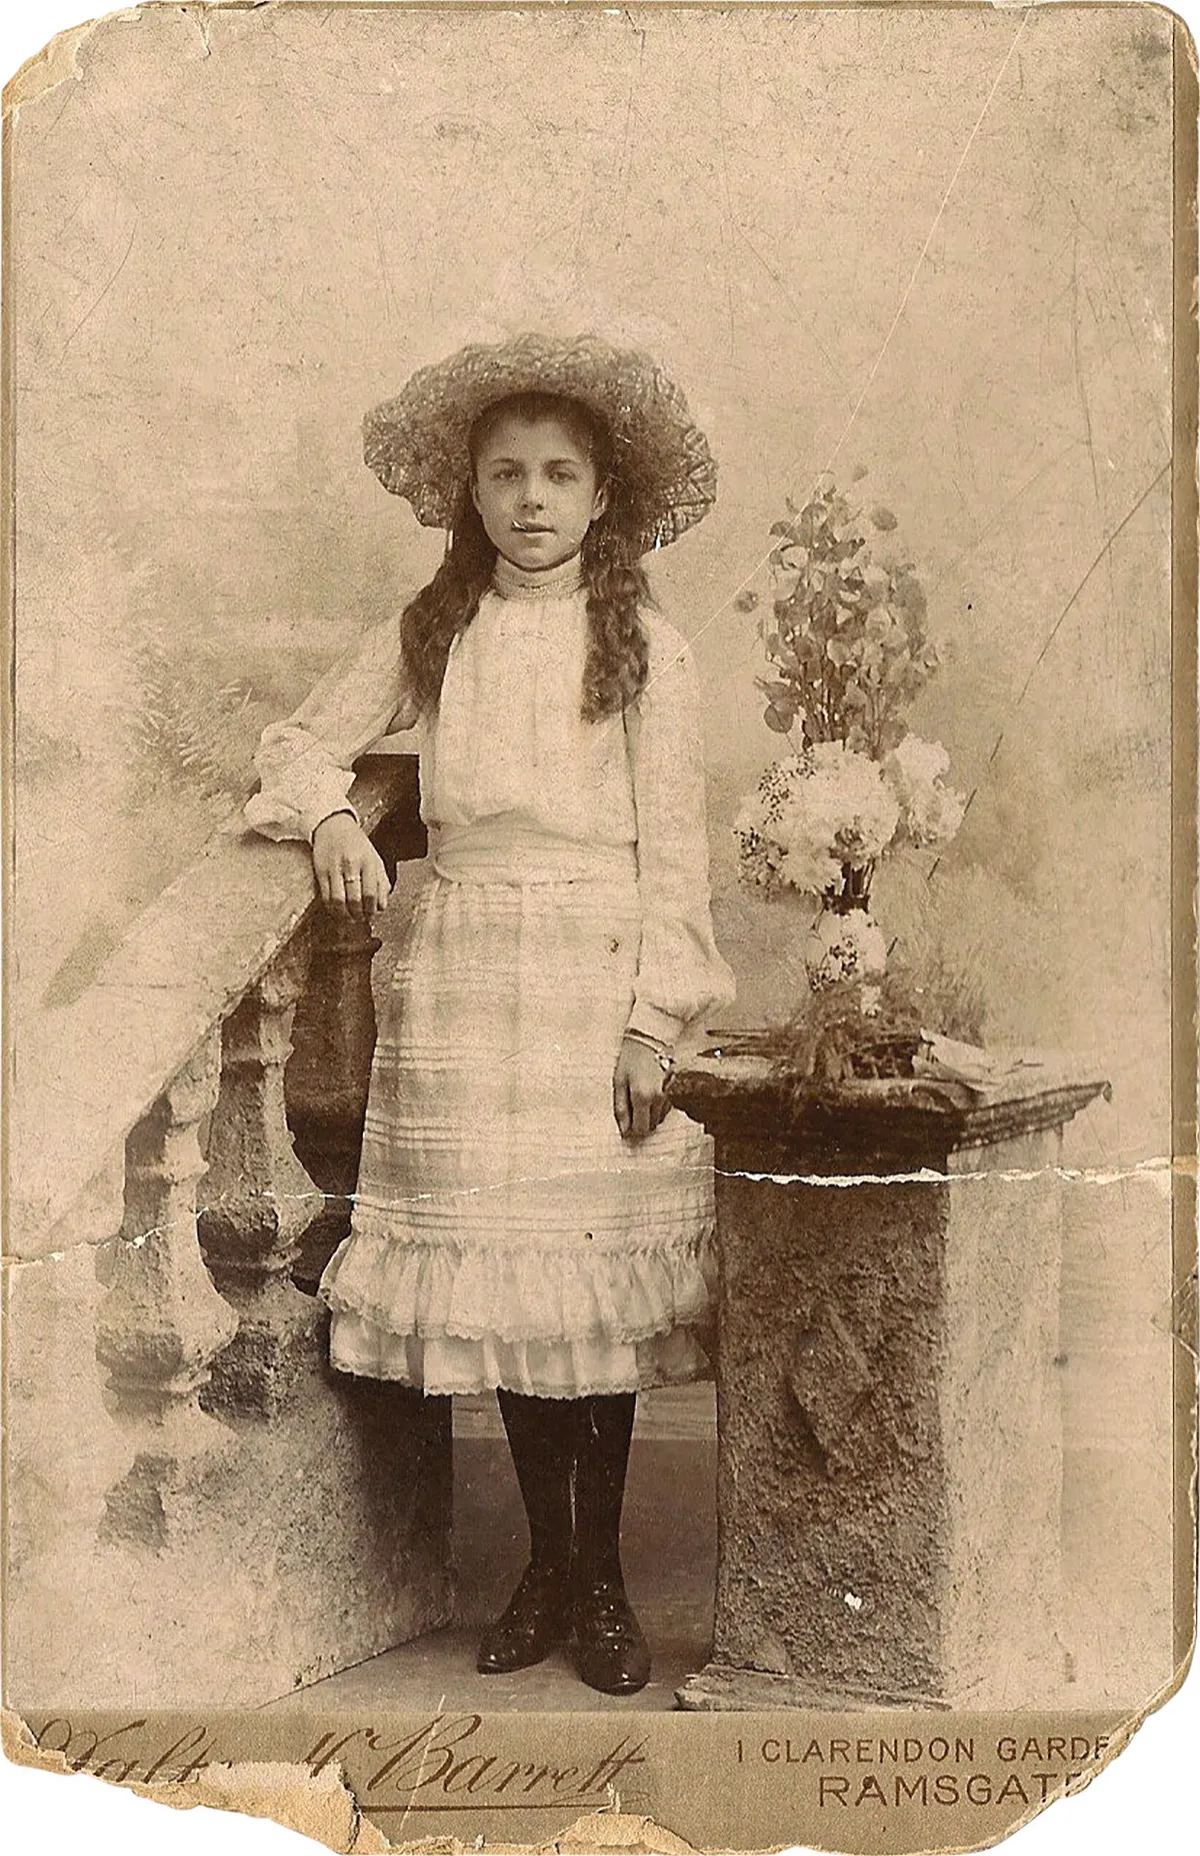 Black and white photograph of a little girl in a white Victorian dress and sunhat